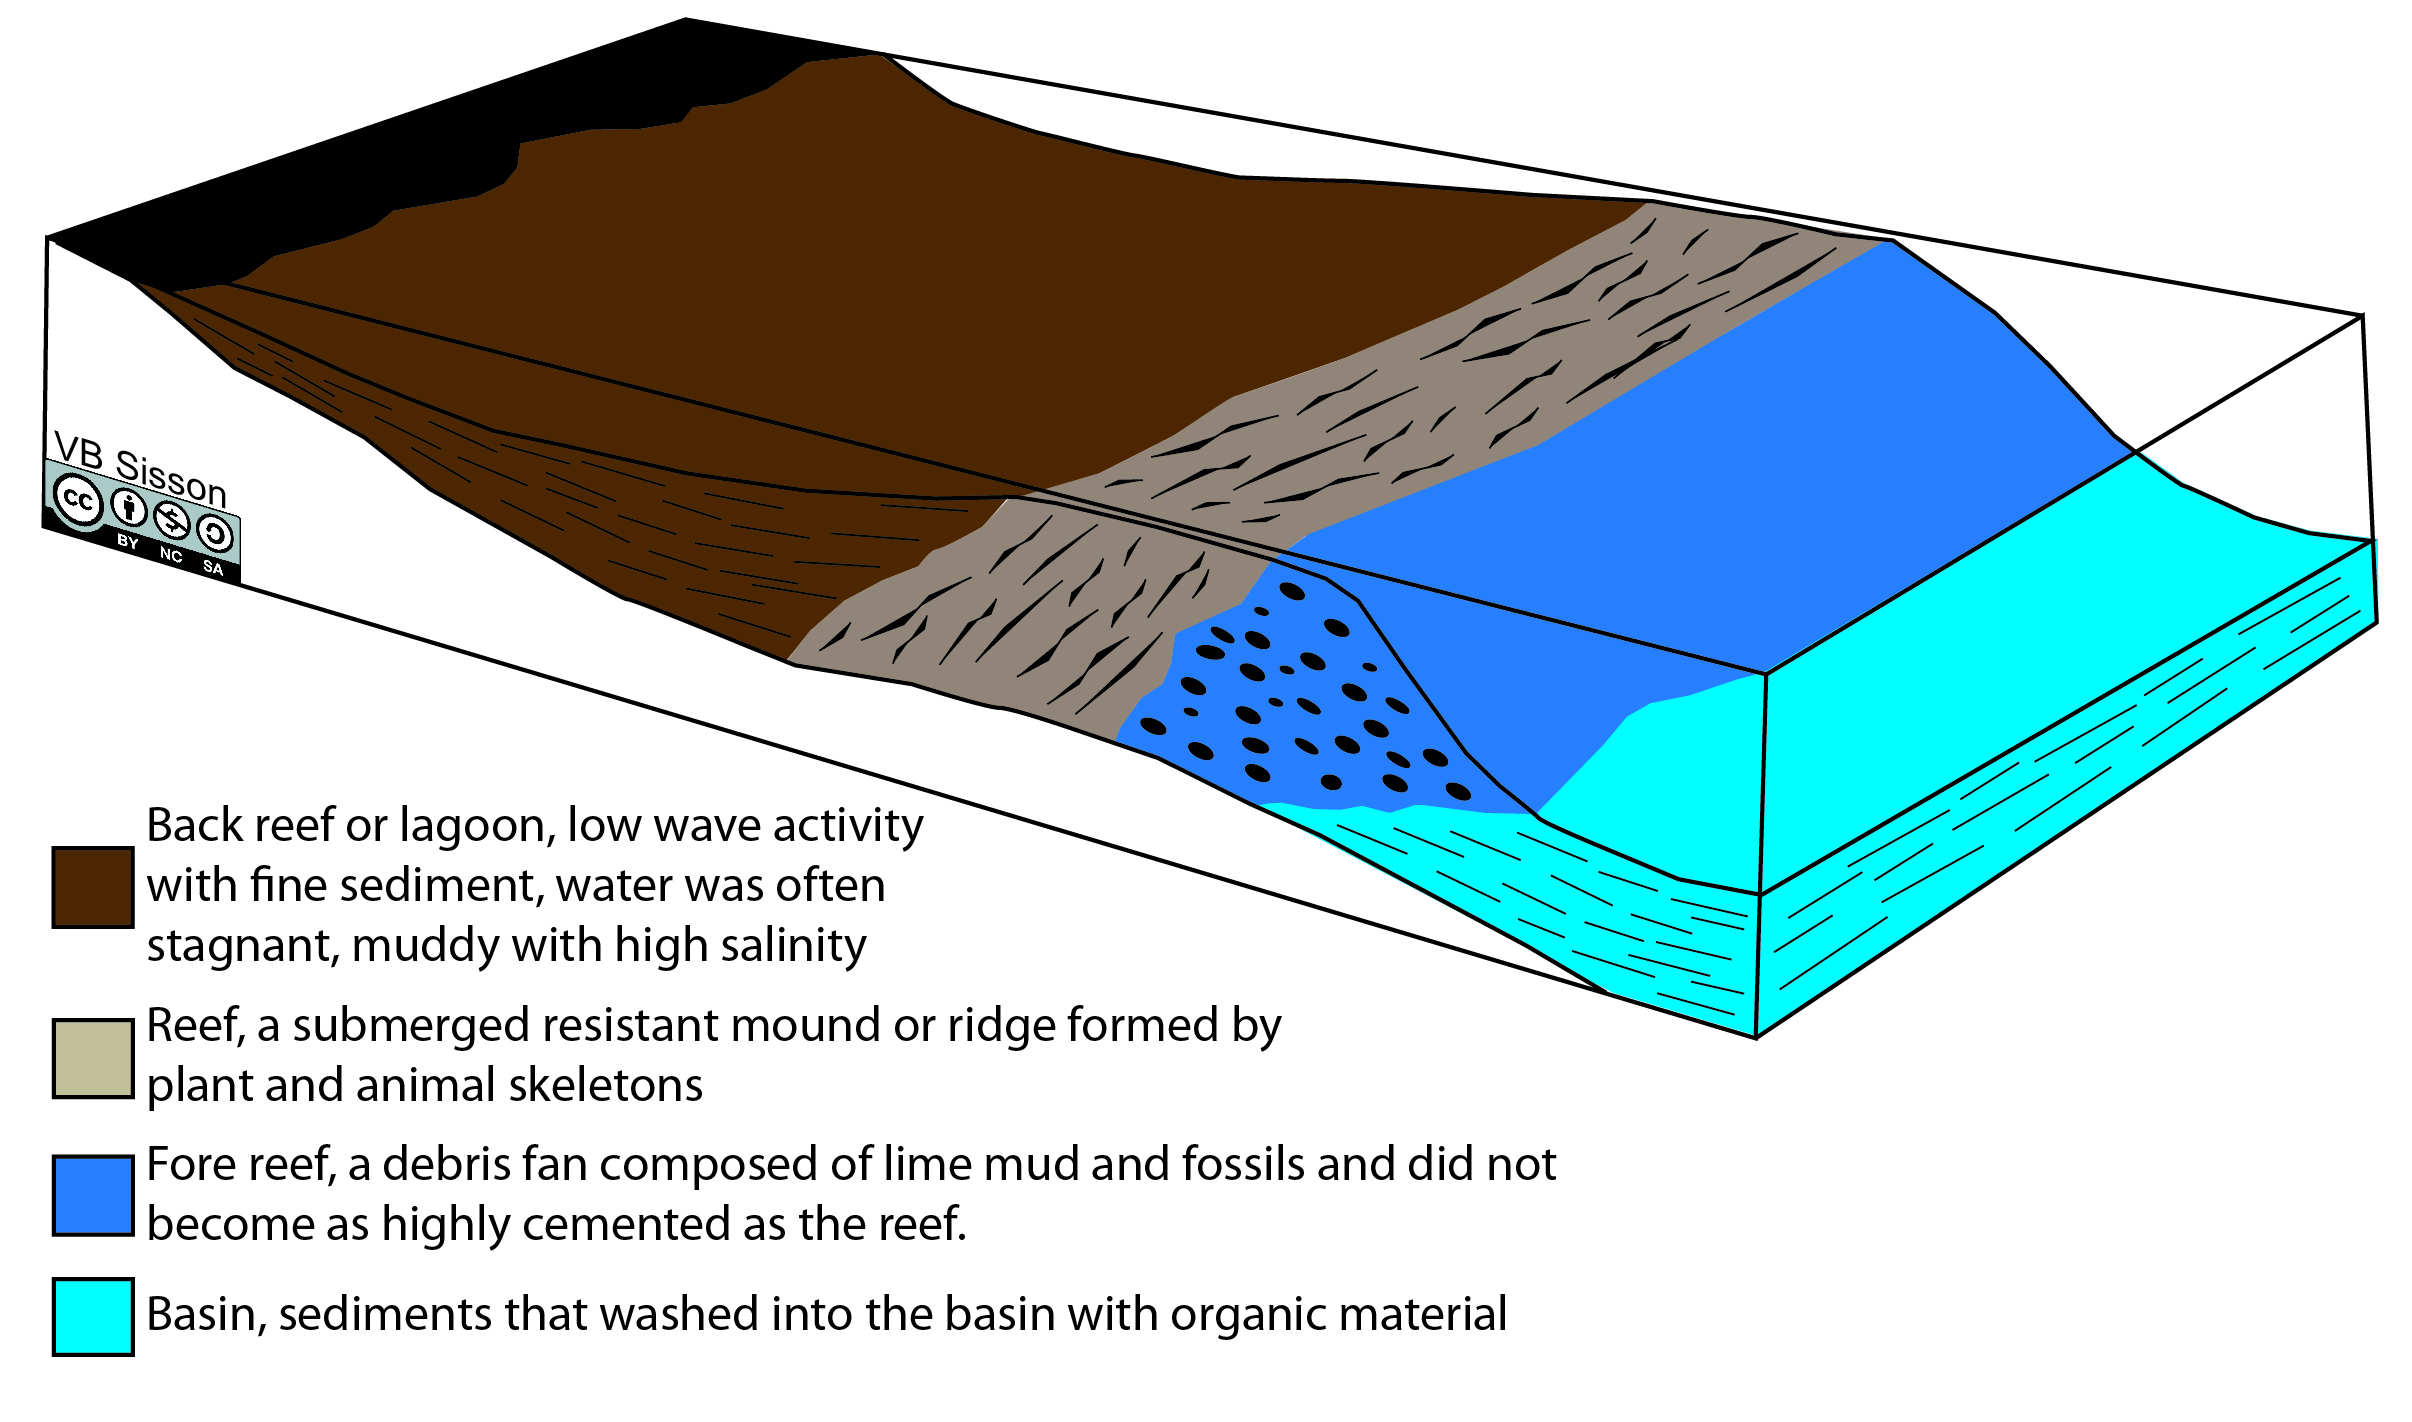 Structure of Devonian reef